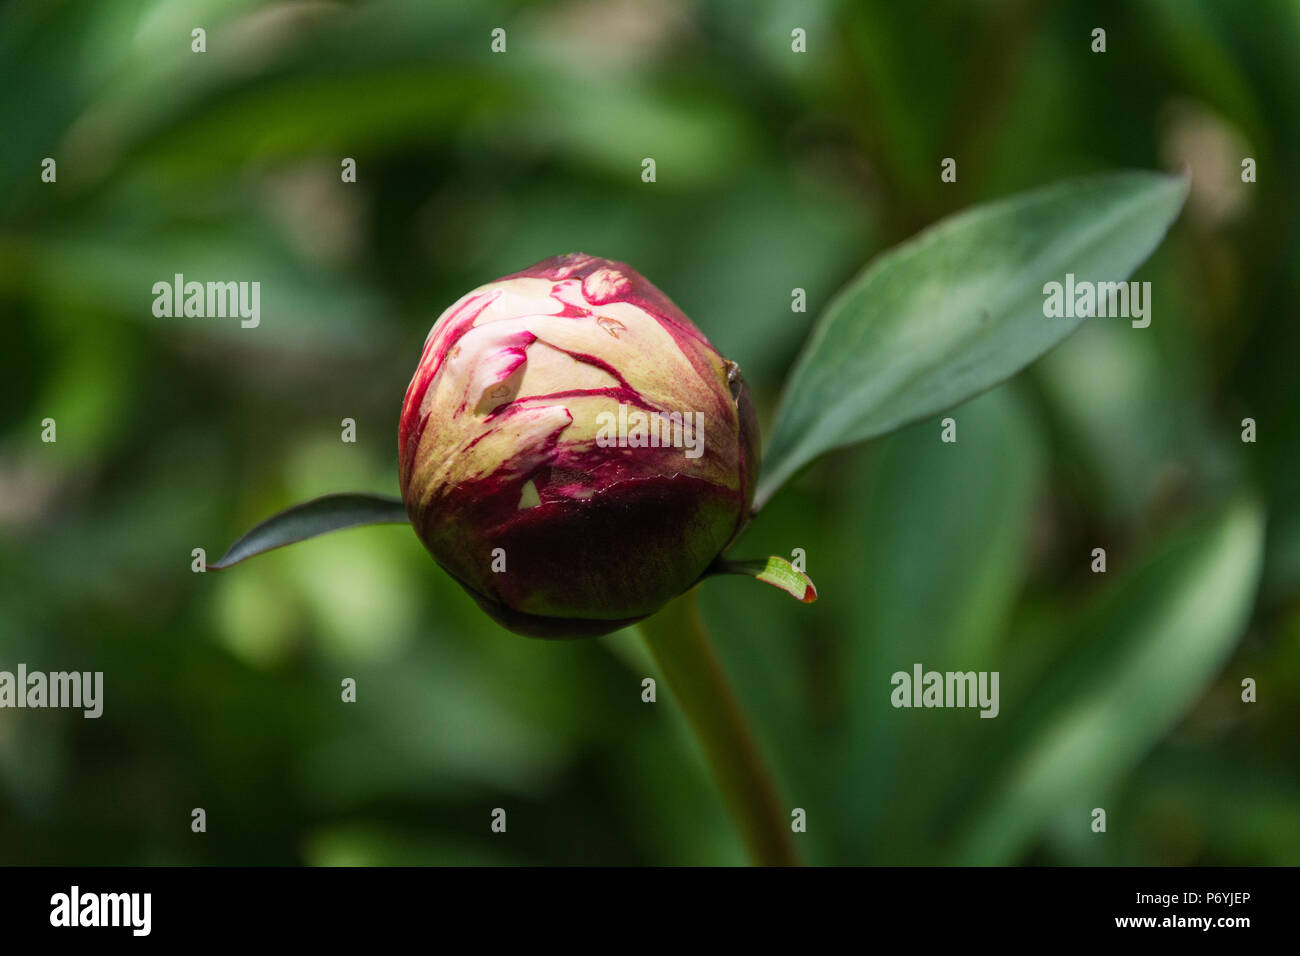 A tight peony (paeony, paeonia, paeoniaceae) bud against a natural green background. Stock Photo